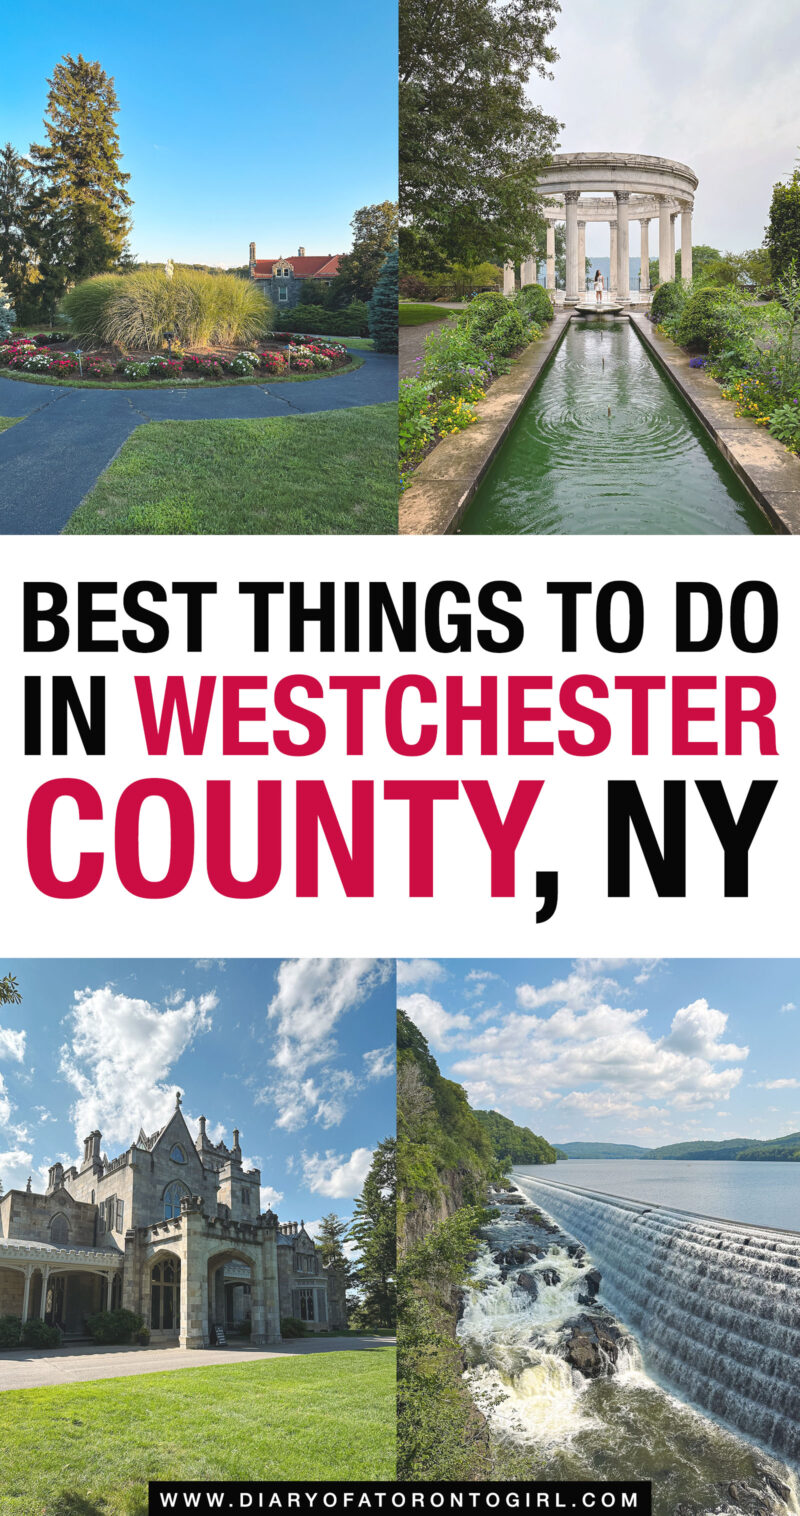 Best things to do Westchester County, NY